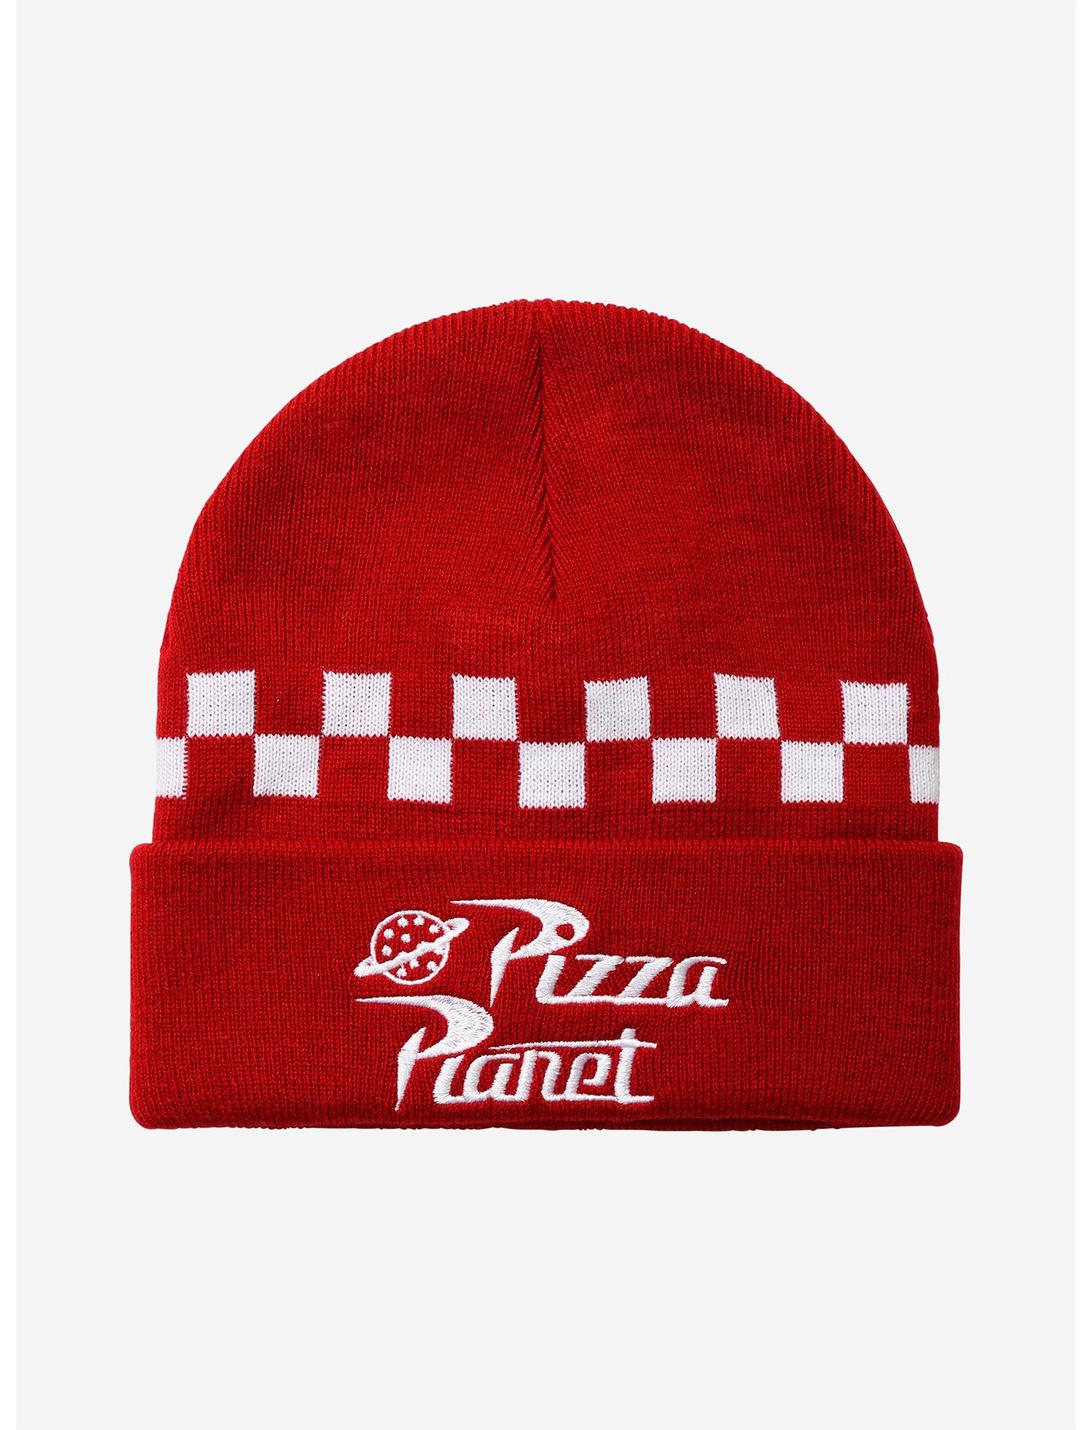 Disney Pixar Toy Story Pizza Planet Beanie - BoxLunch Exclusive, , hi-res